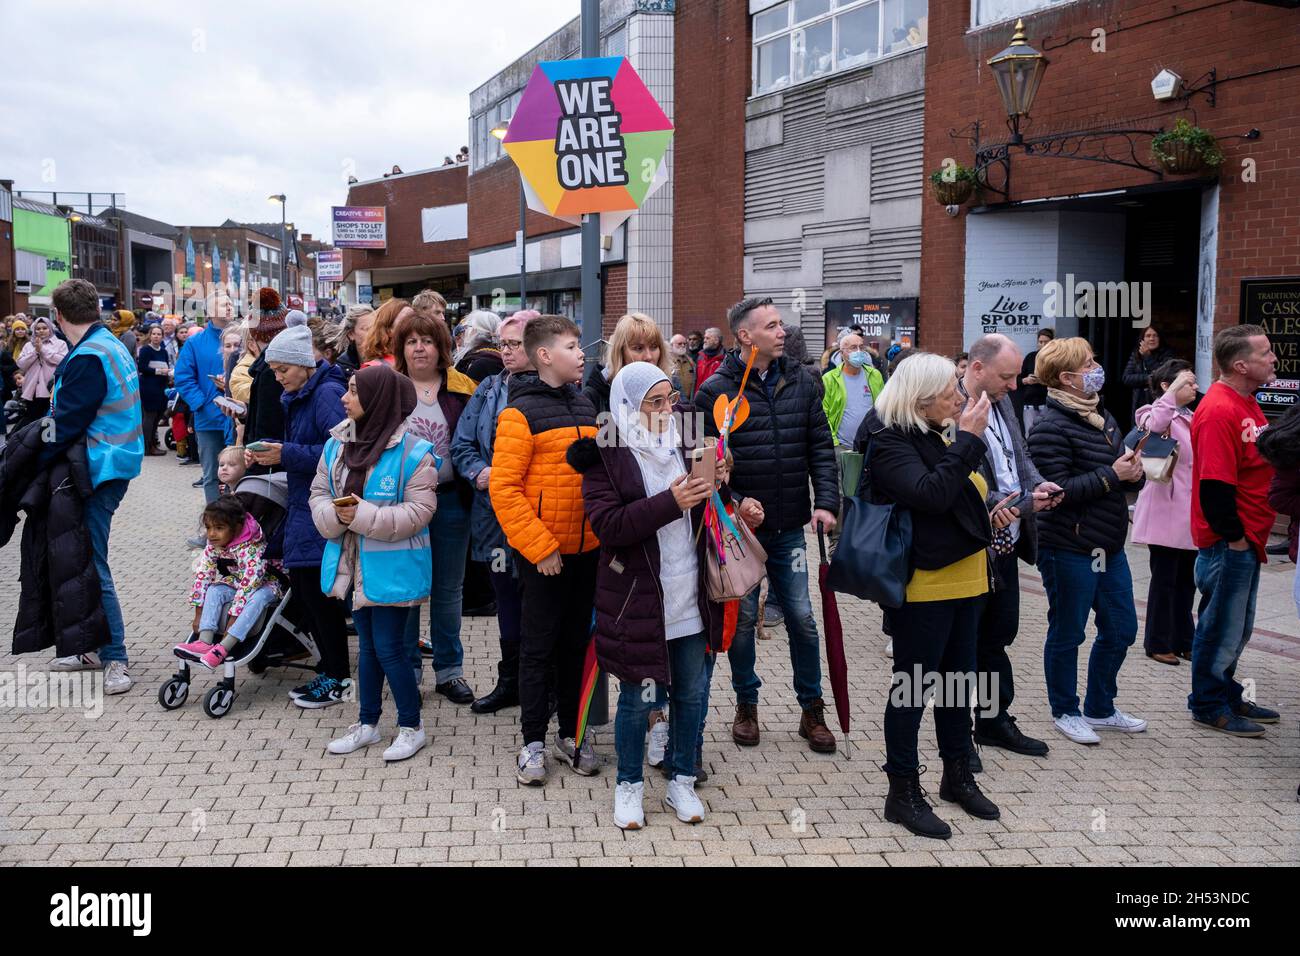 People wait for Little Amal before she walks along the High Street in Erdington on 28th October 2020 in Birmingham, United Kingdom. Little Amal is a 3.5 metre-tall puppet and living artwork of a young Syrian refugee child who has spent the last 3 months walking 8000 km from the boarder of Syria across Turkey, Greece, Italy, France, Switzerland, Germany, Belgium and the UK to focus attention on the urgent needs of young refugees. Stock Photo